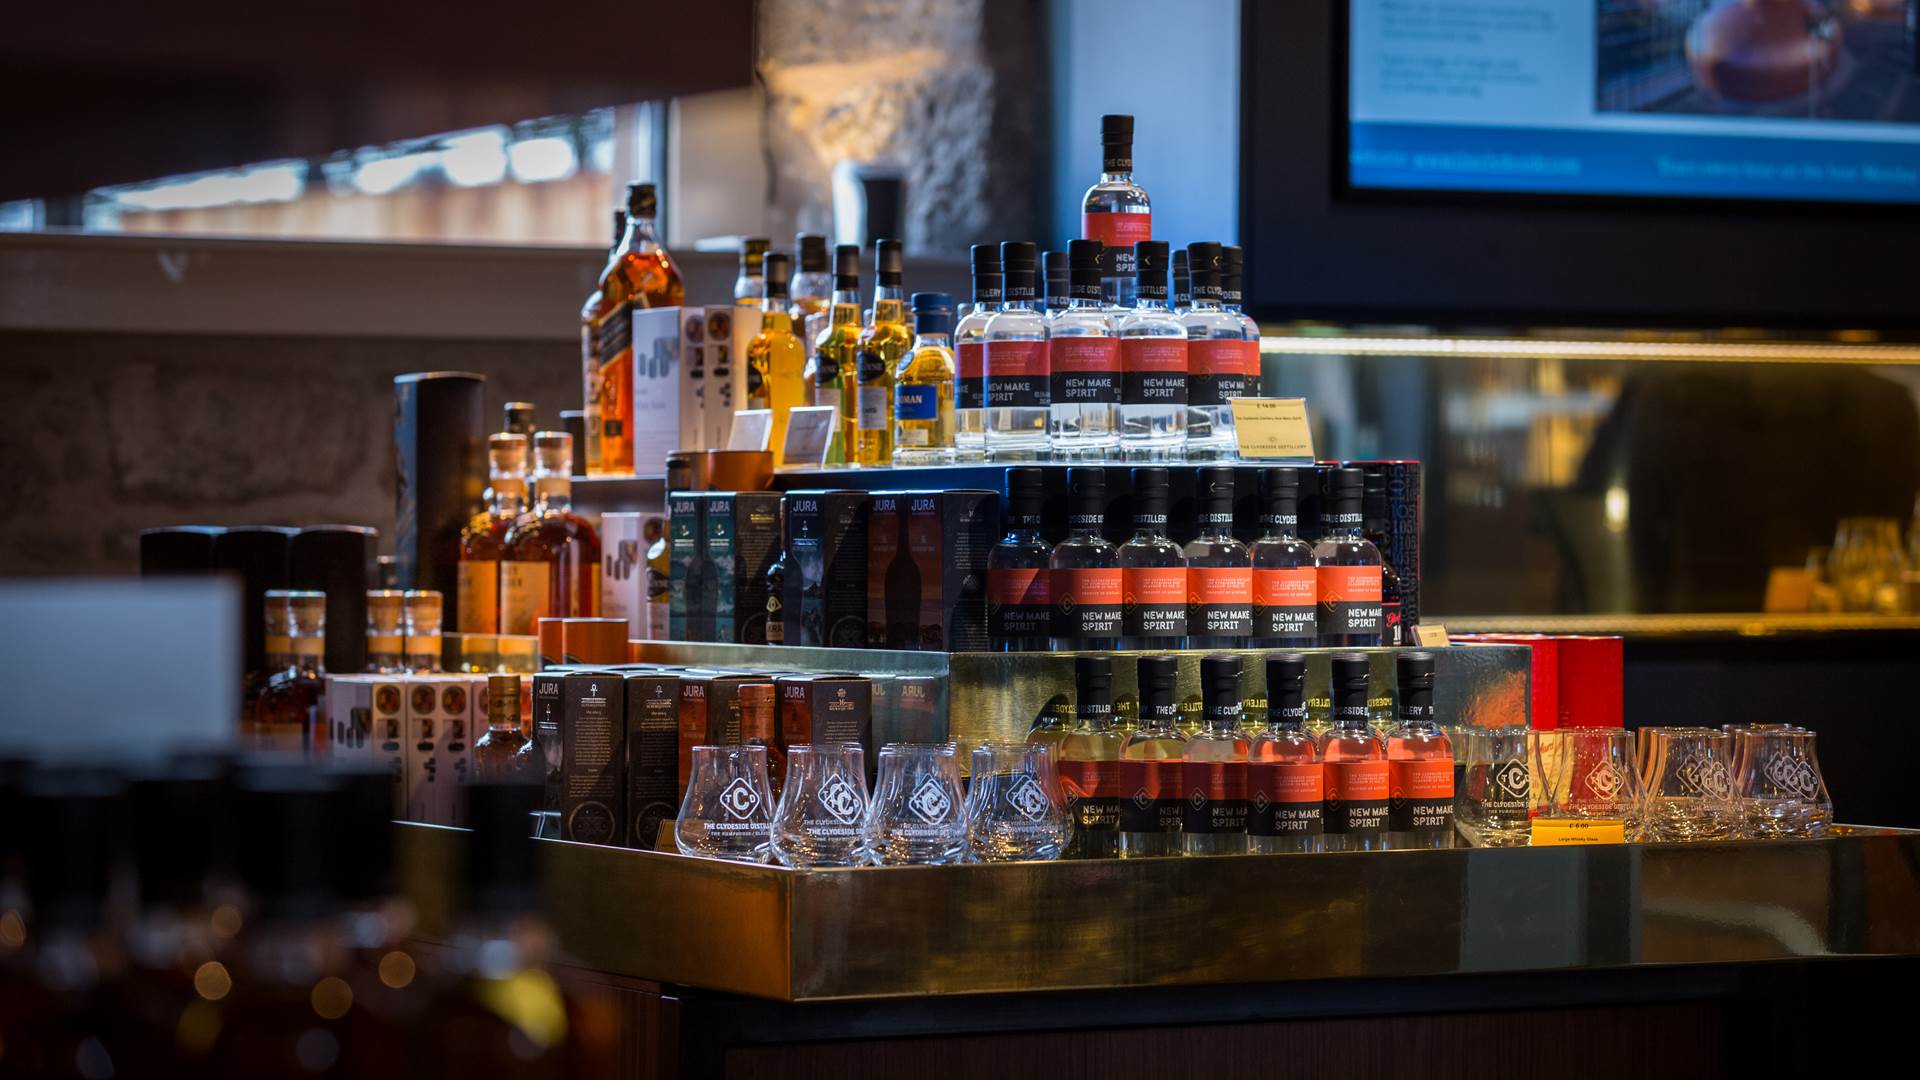 The Clydeside Distillery retail shop, includes display island of New Make Spirit and other miniature bottles 